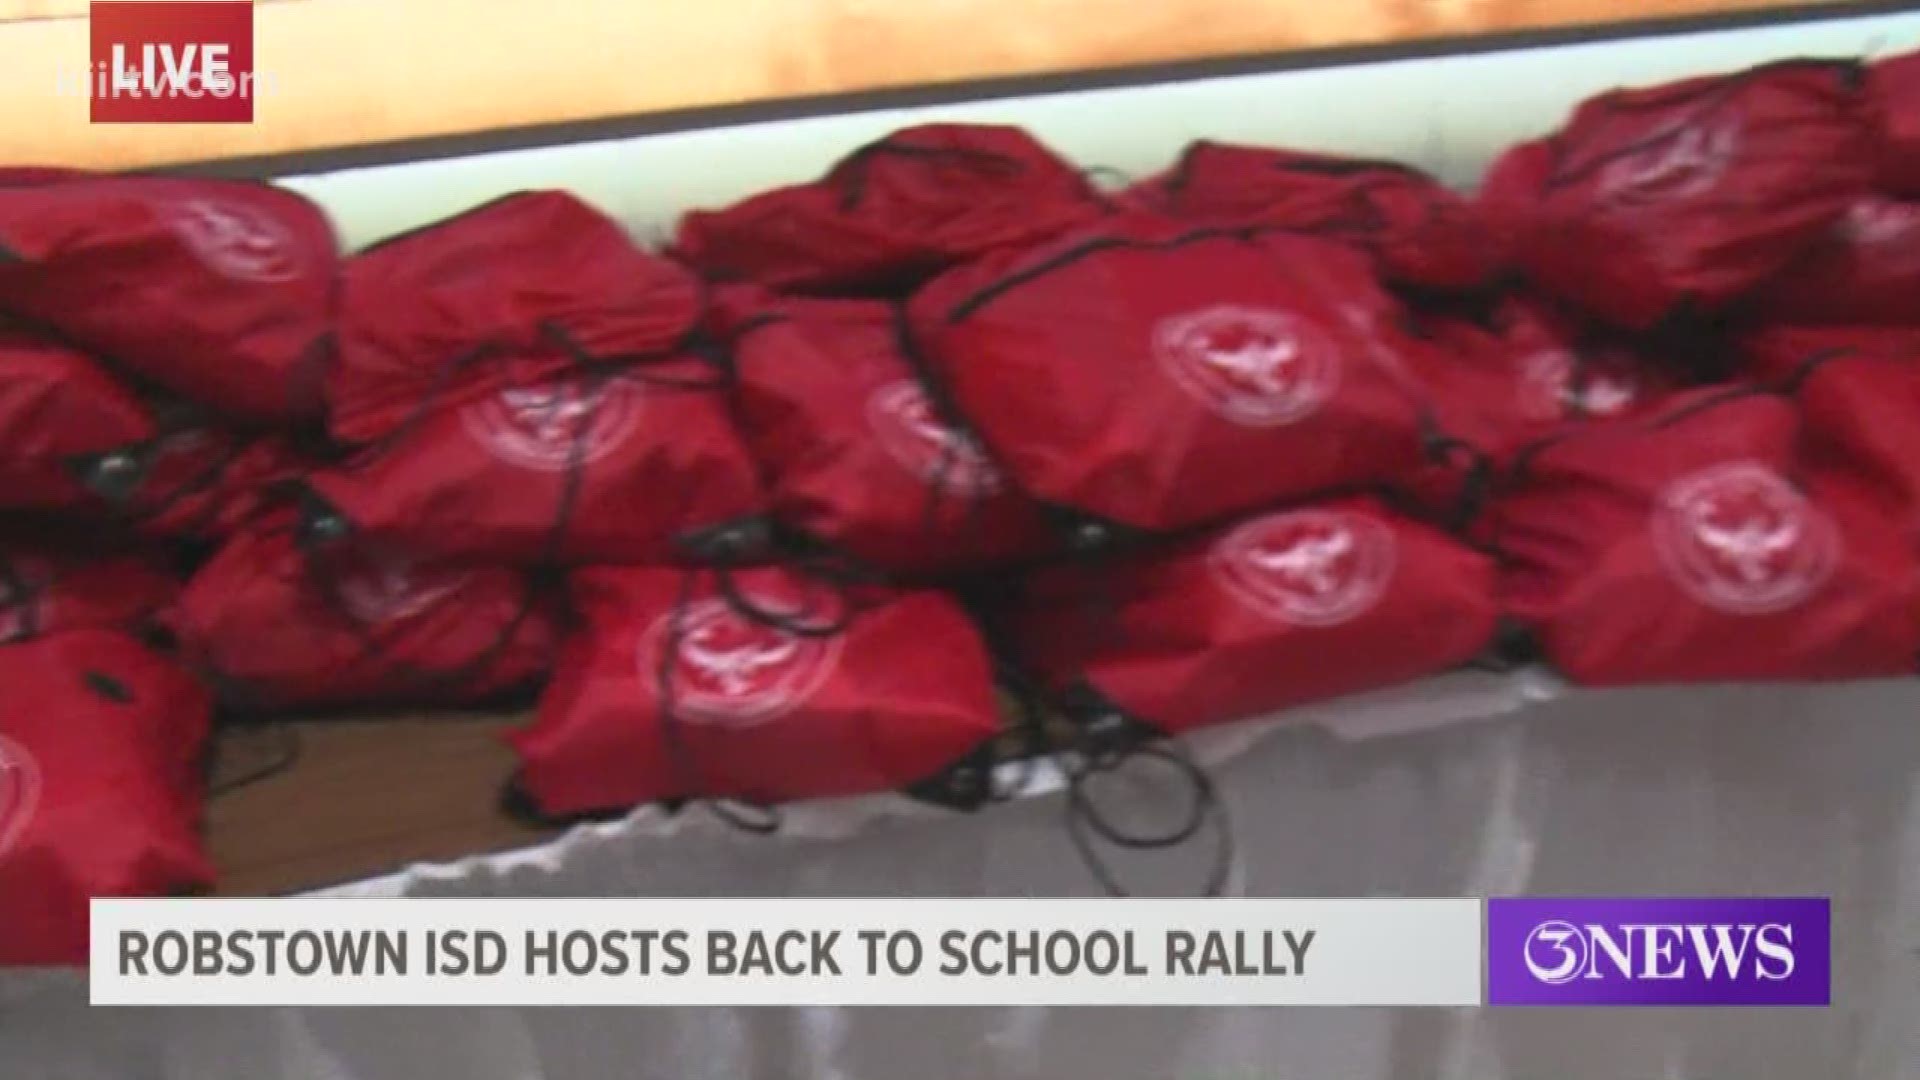 Free backpacks filled with school supplies were available to the first 500 students to attend, and refreshments, entertainment and fun were provided at the event.